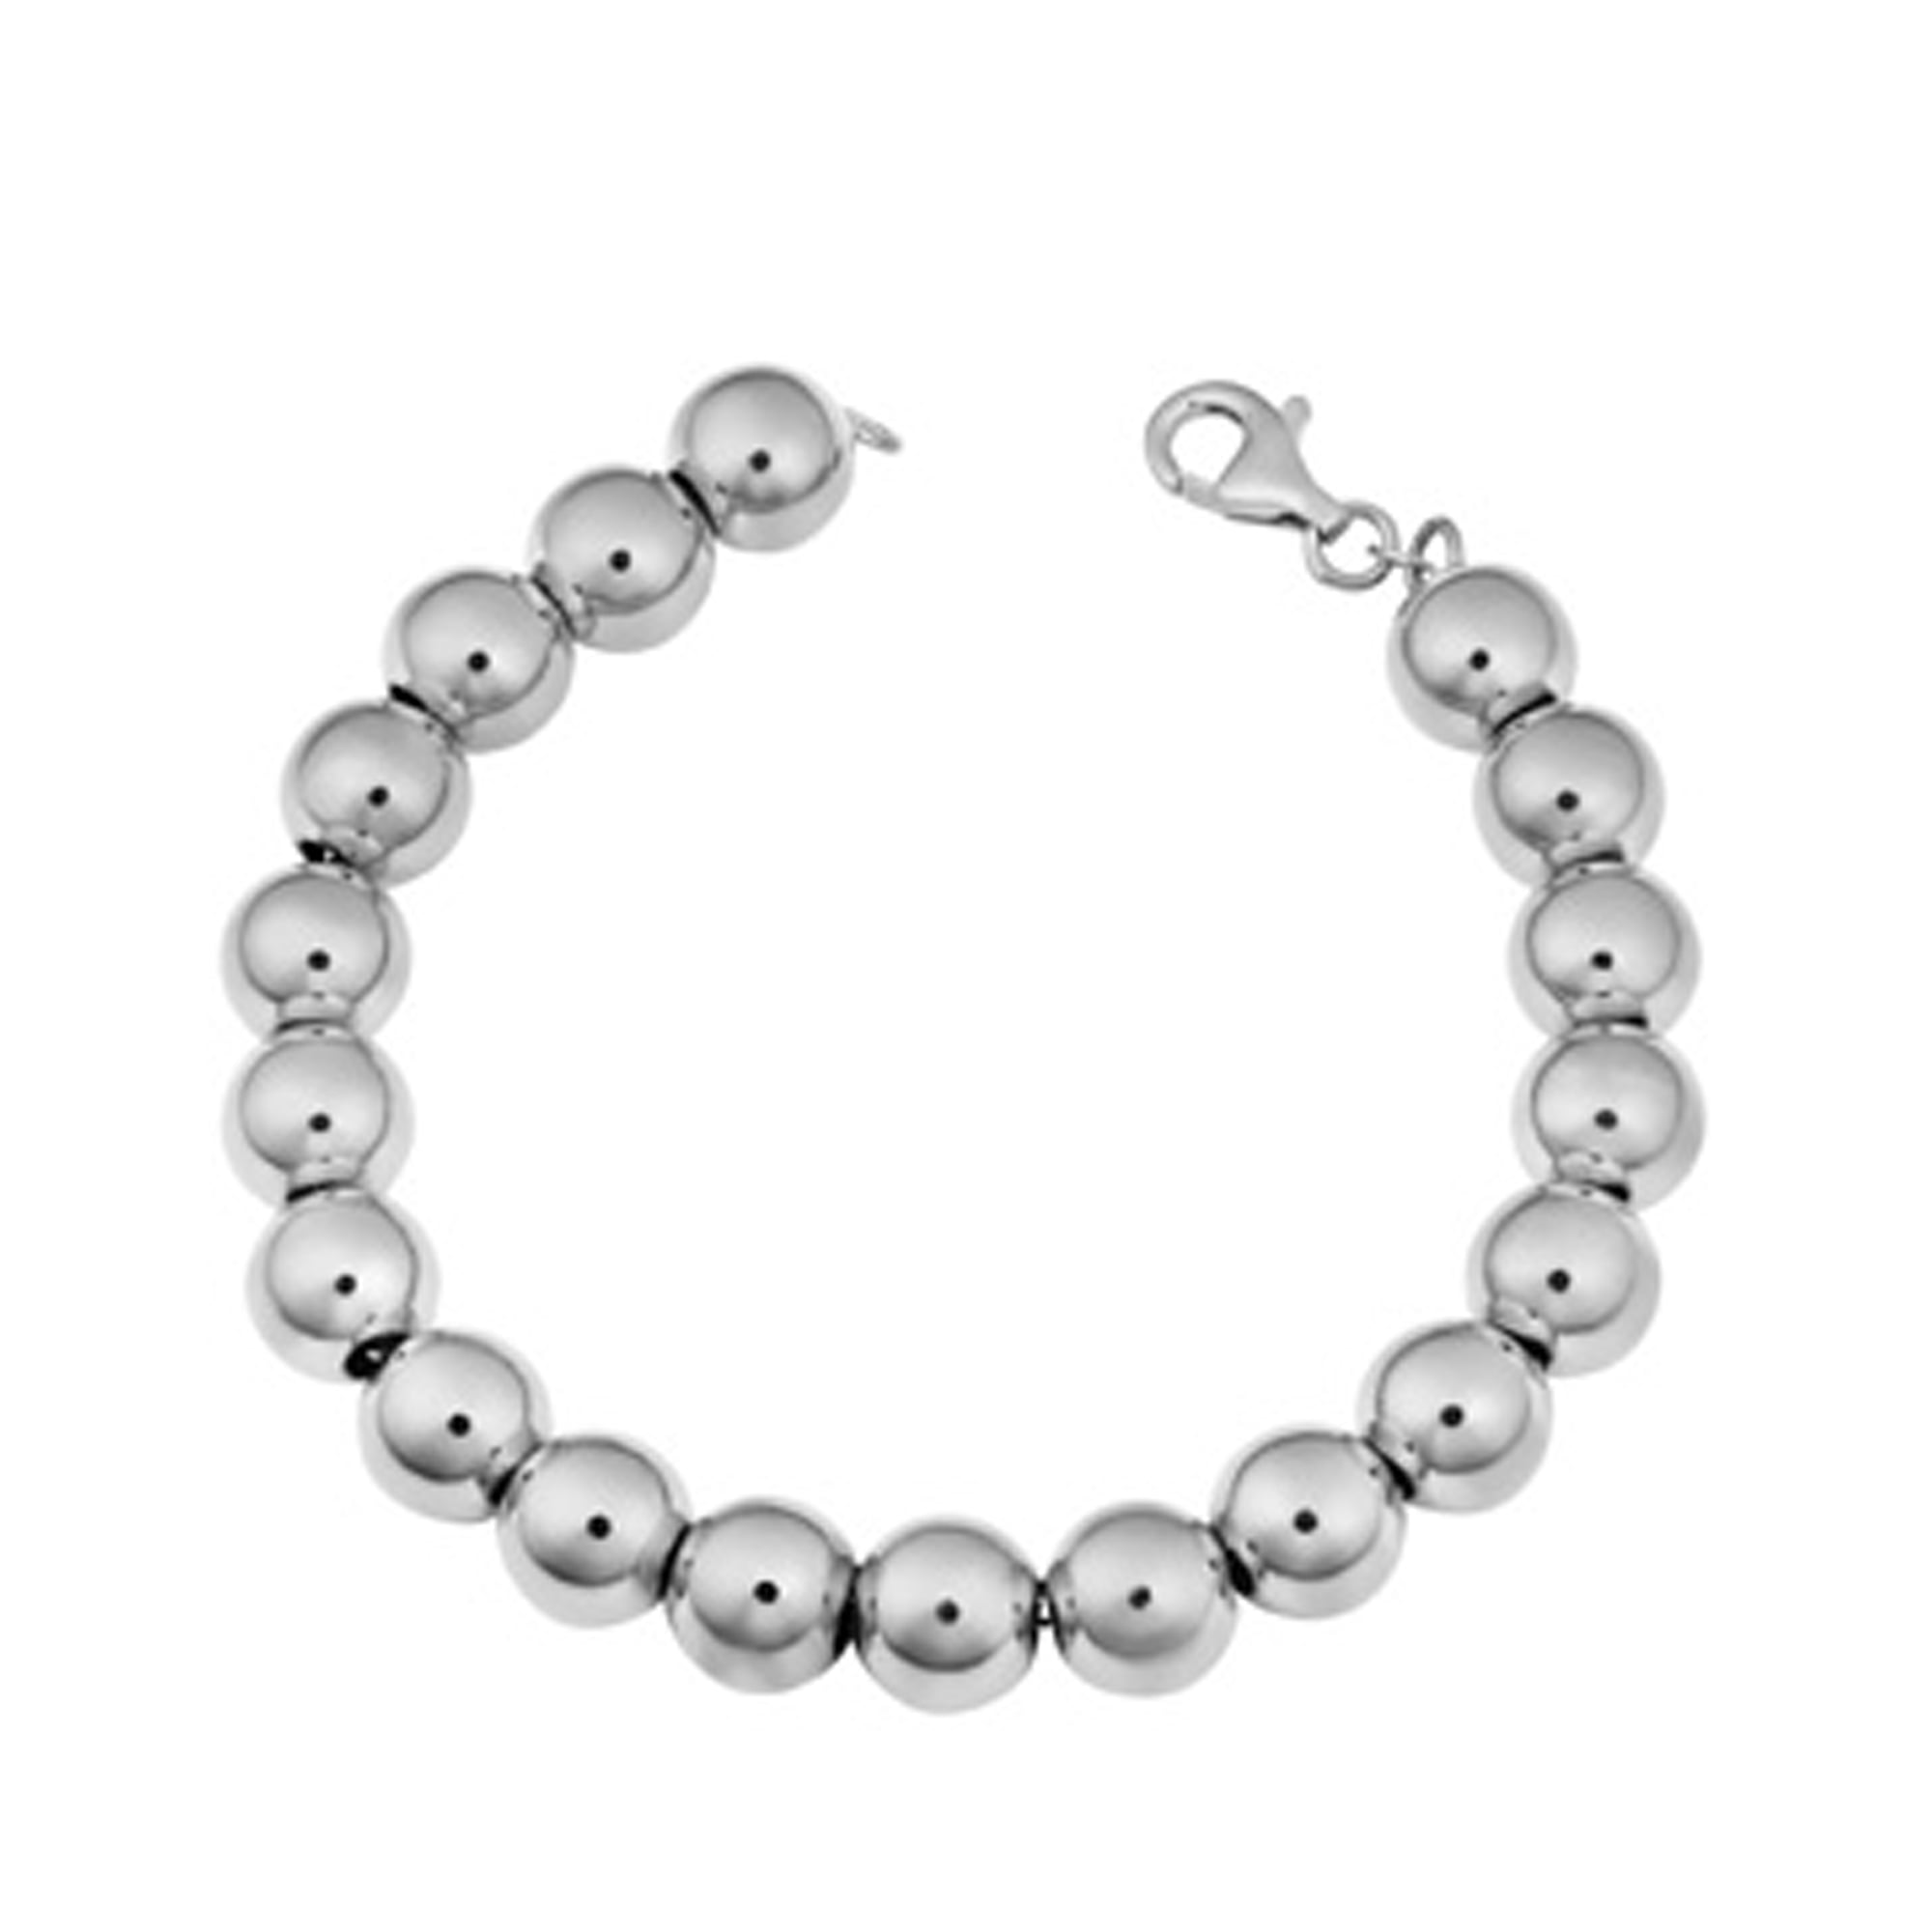 Jewelry Affairs - Sterling Silver 10mm Polished Ball Bracelet, 8 ...